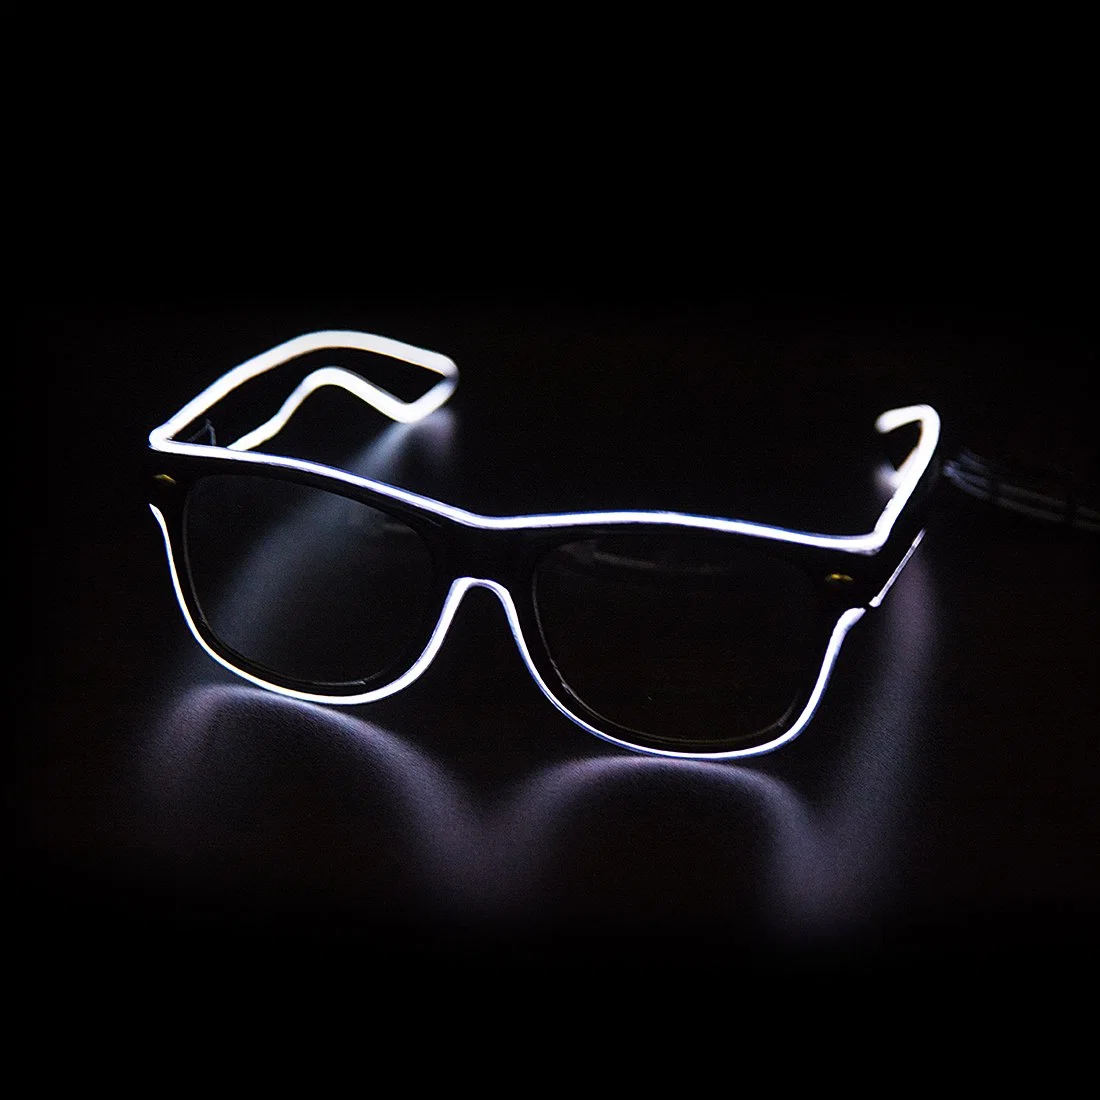 LED Glasses Neon Party Flashing Glasses EL Wire Glowing Gafas Luminous Bril Novelty Gift Glow Sunglasses Bright Light Supplies